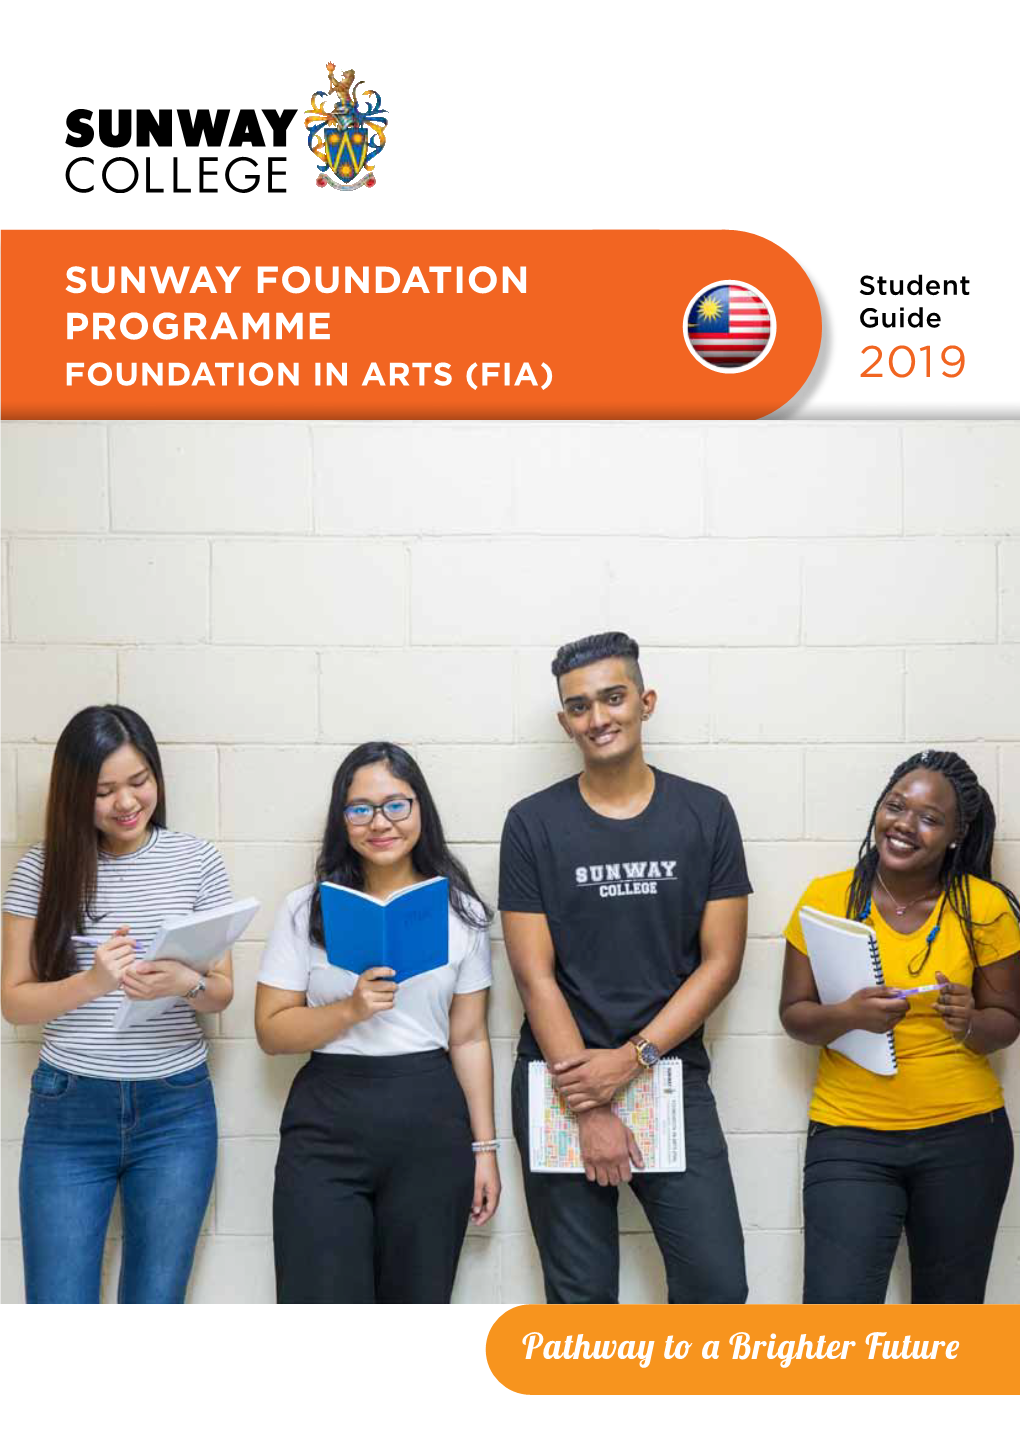 Sunway Foundation Programme at Sunway College